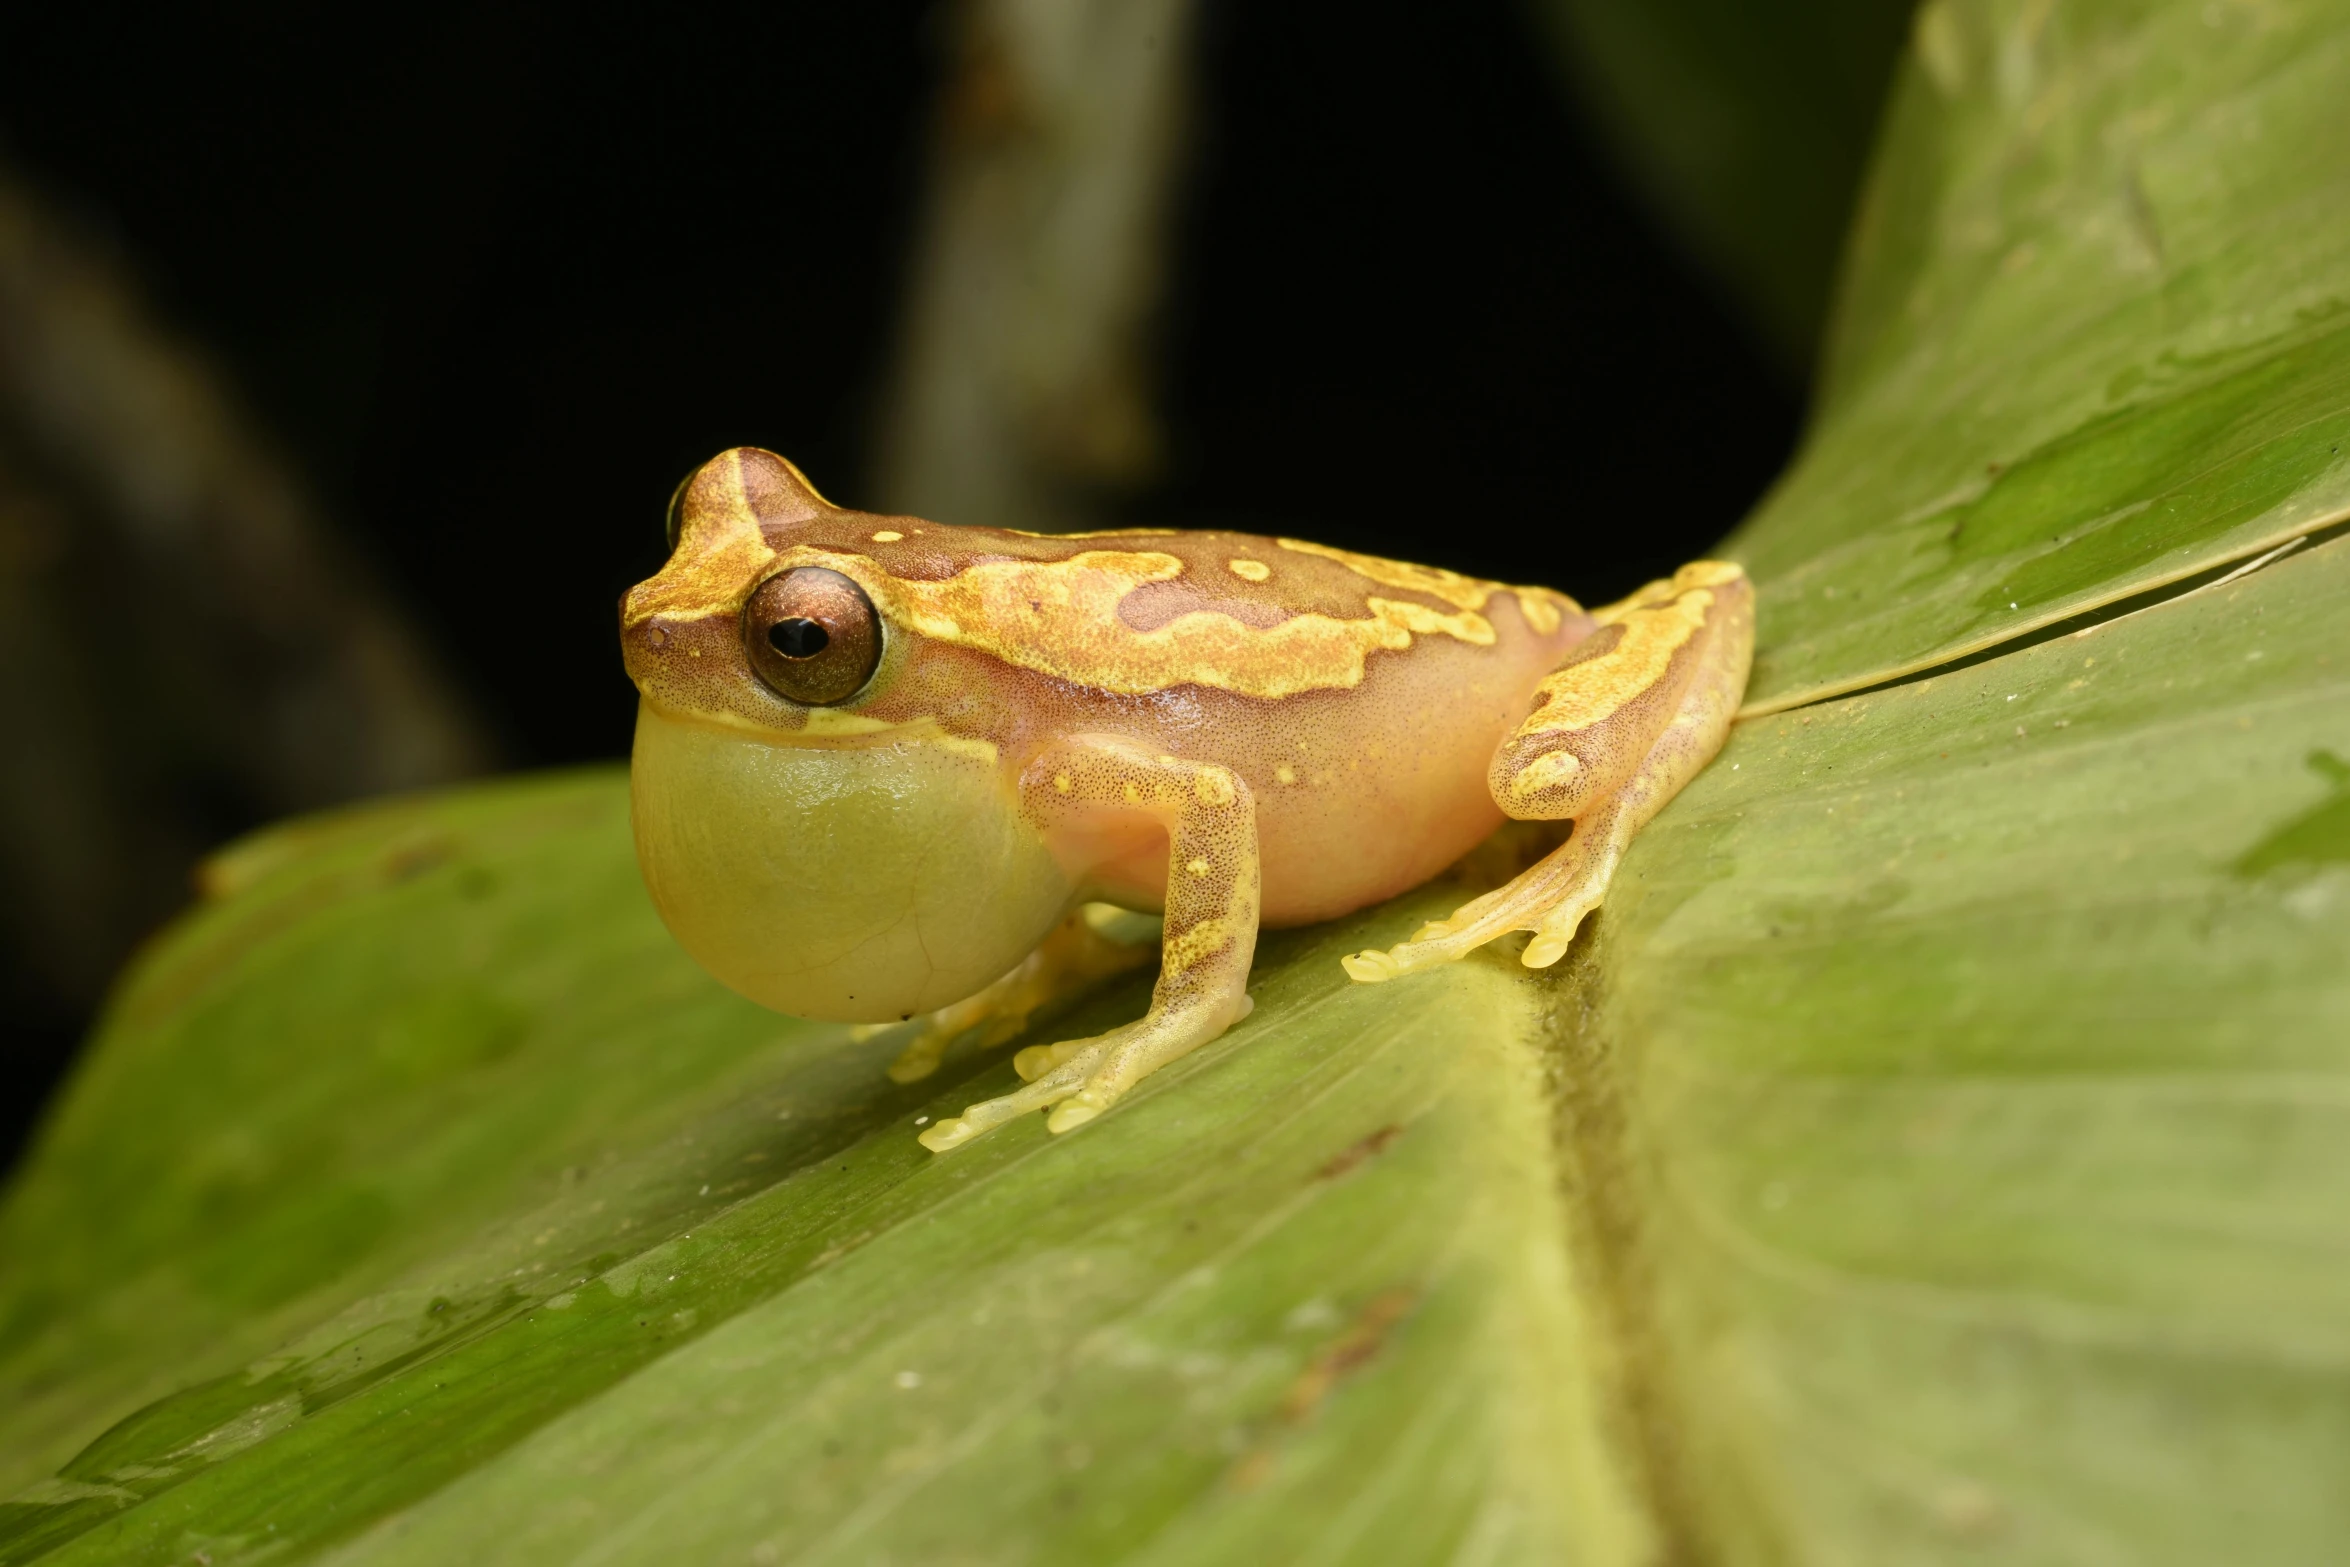 there is a brown and yellow frog sitting on a leaf